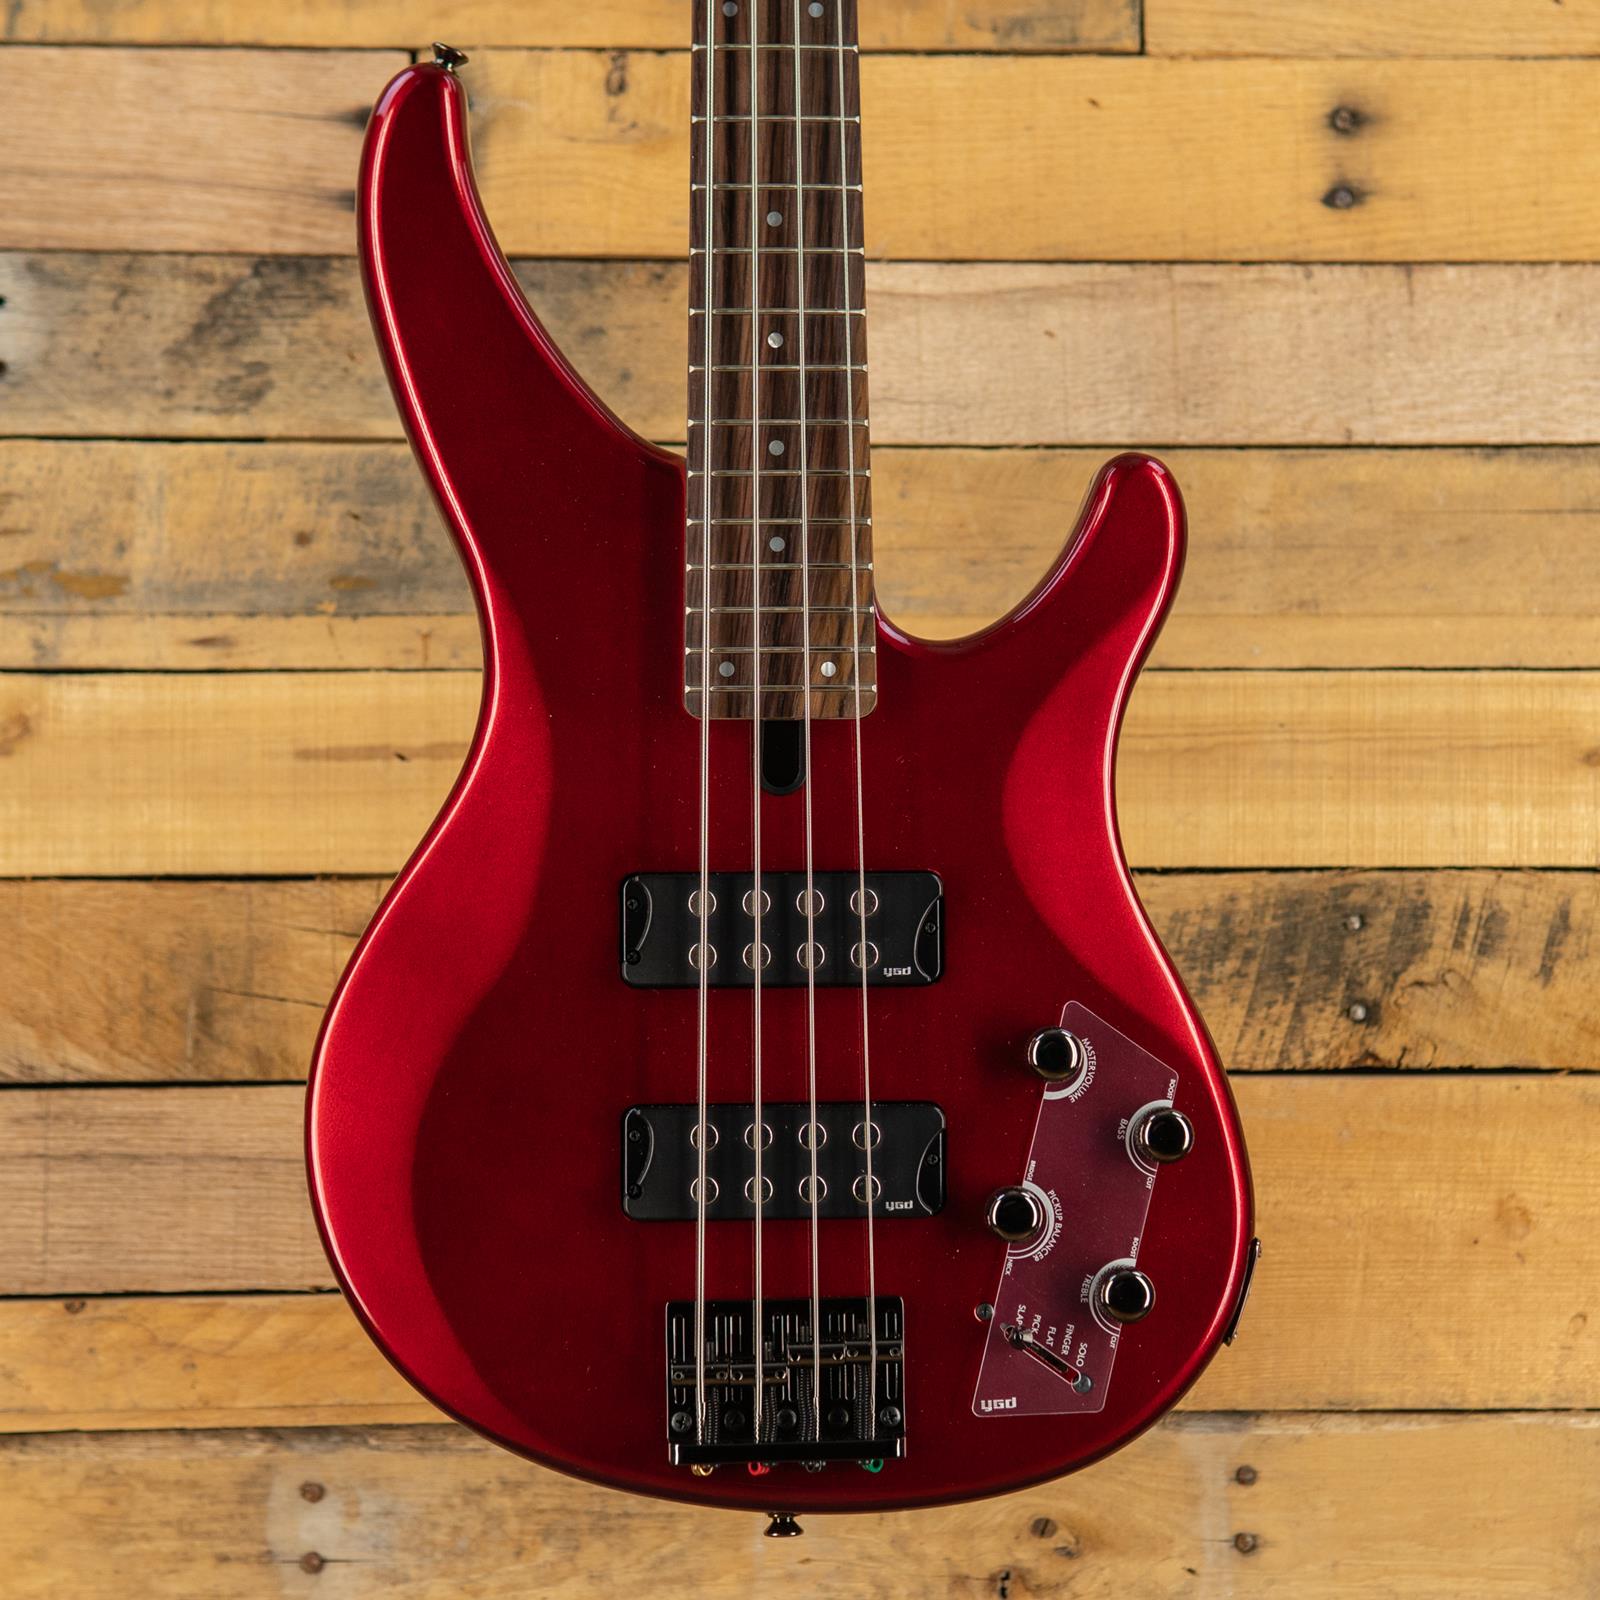 Yamaha TRBX304CAR 4-string; solid mahogany body, 5-piece maple/rosewood neck, rosewood fingerboard, M5 humbucking pickups, 2-band EQ,Performance EQ switch; Candy Apple Red